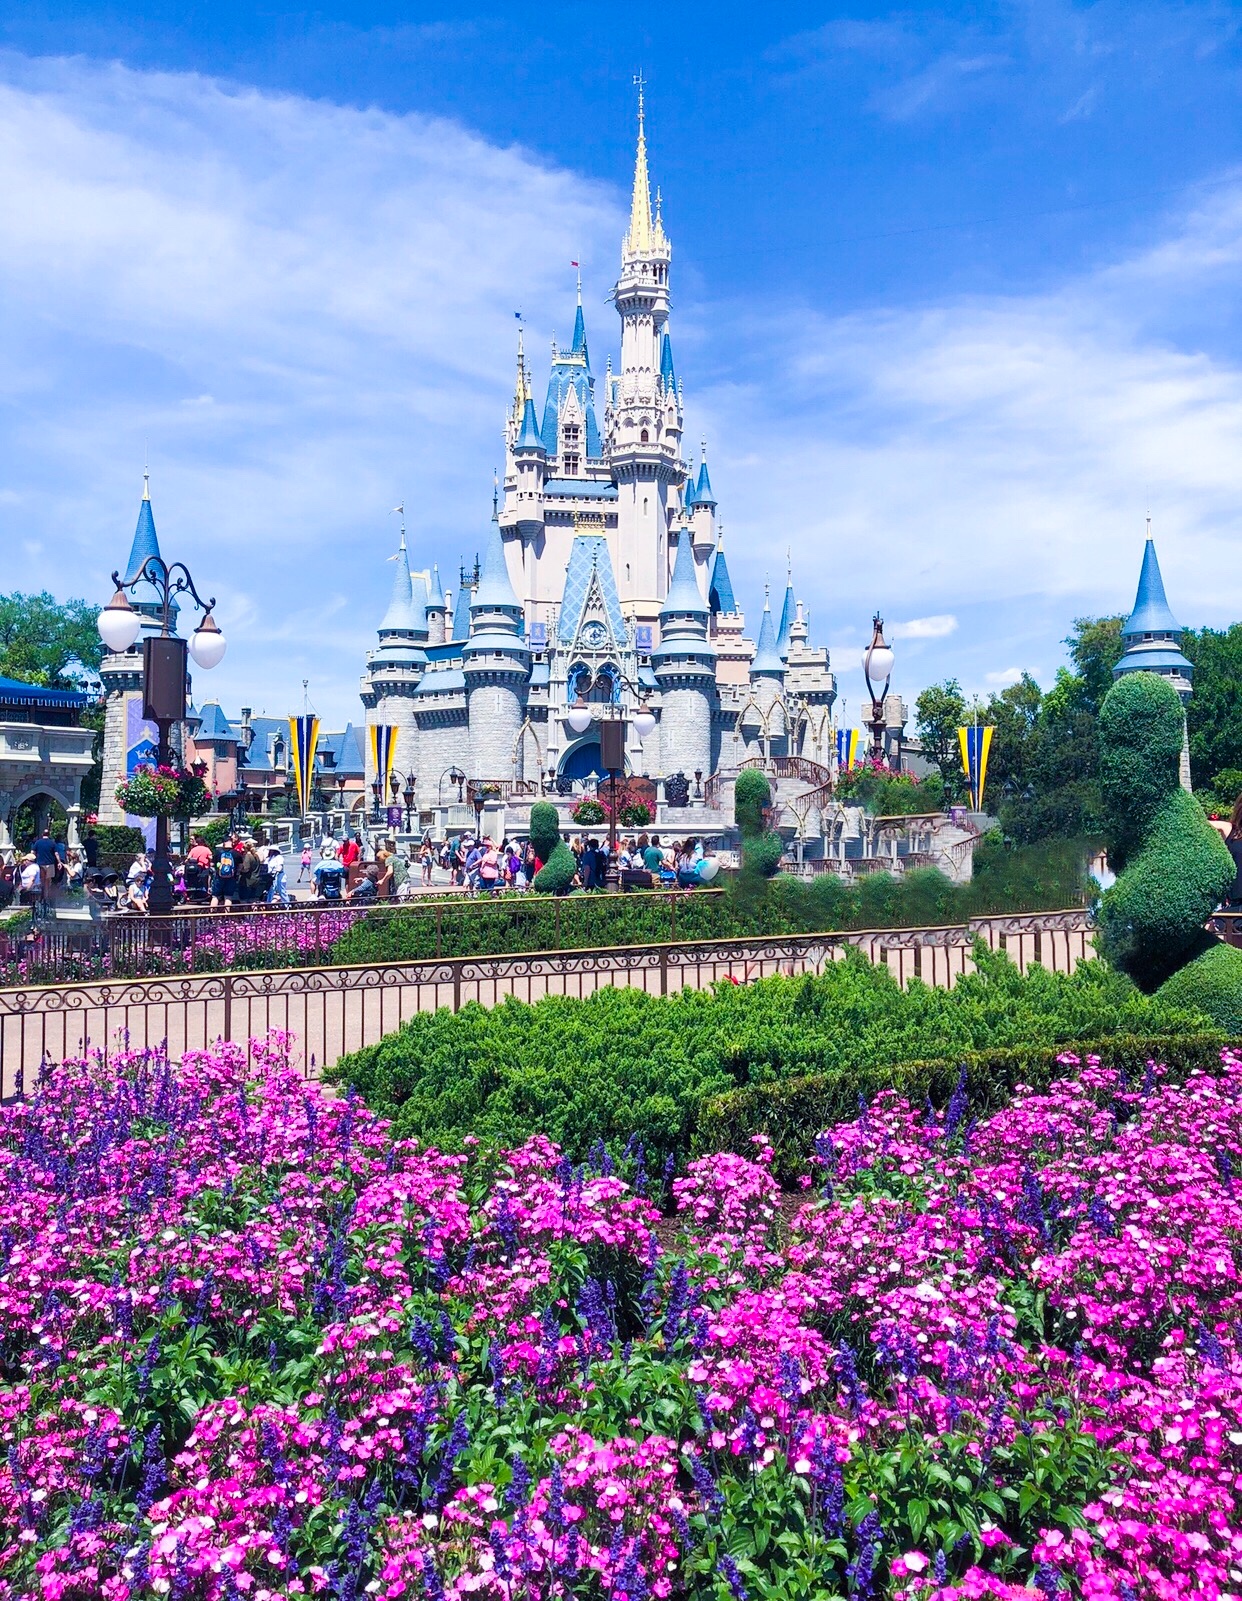 10 Tips for Planning a Disney World Vacation